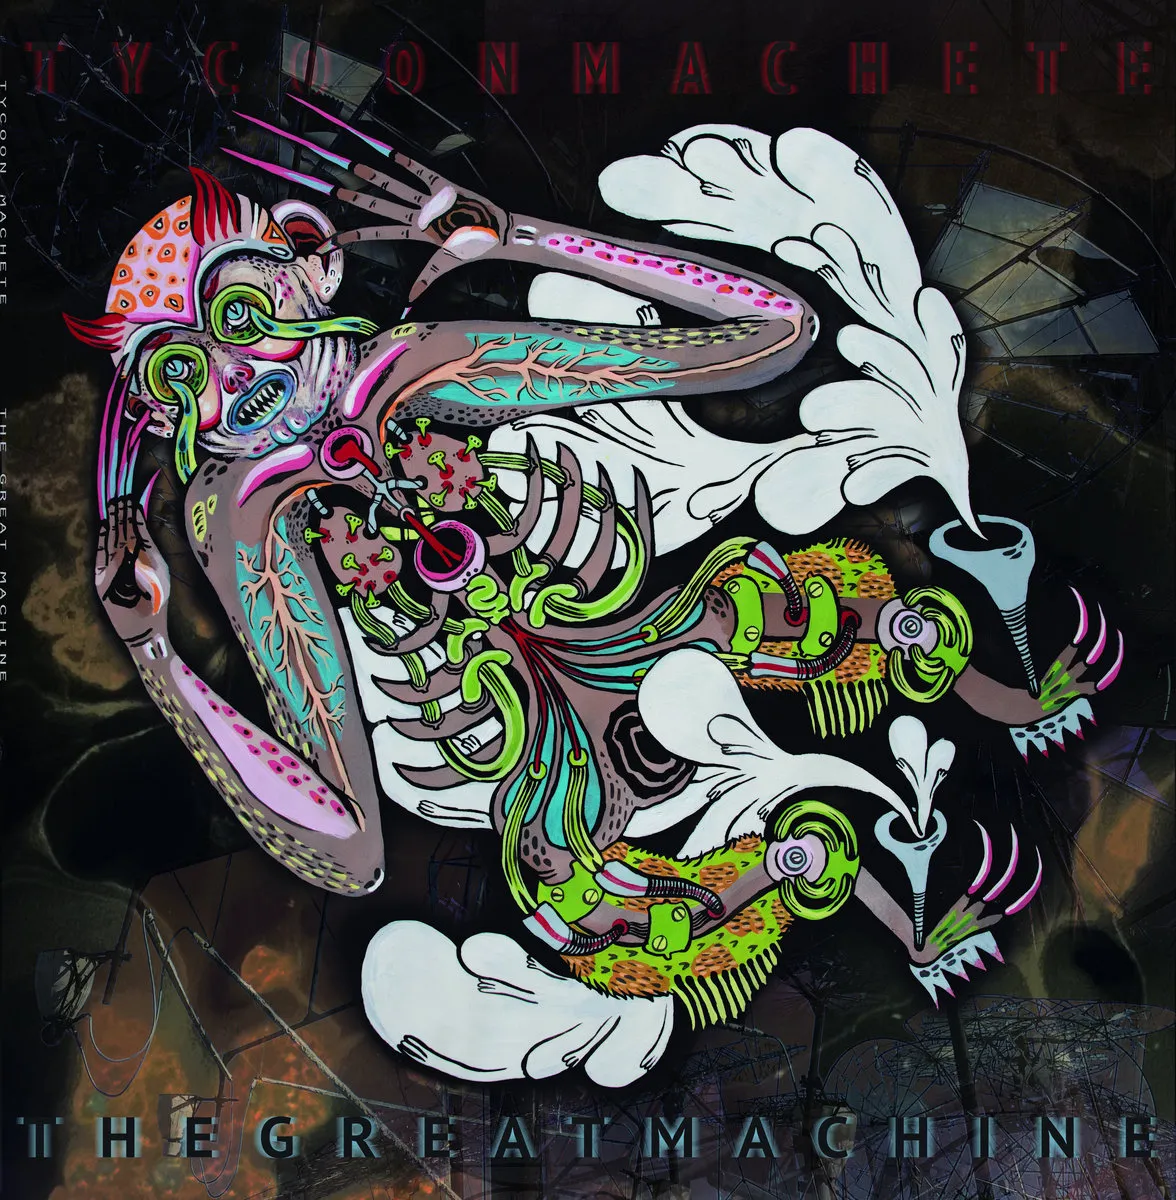 Album art for "The Great Machine" is a vivid, stylized anatomic illustration of a mysterious creature.